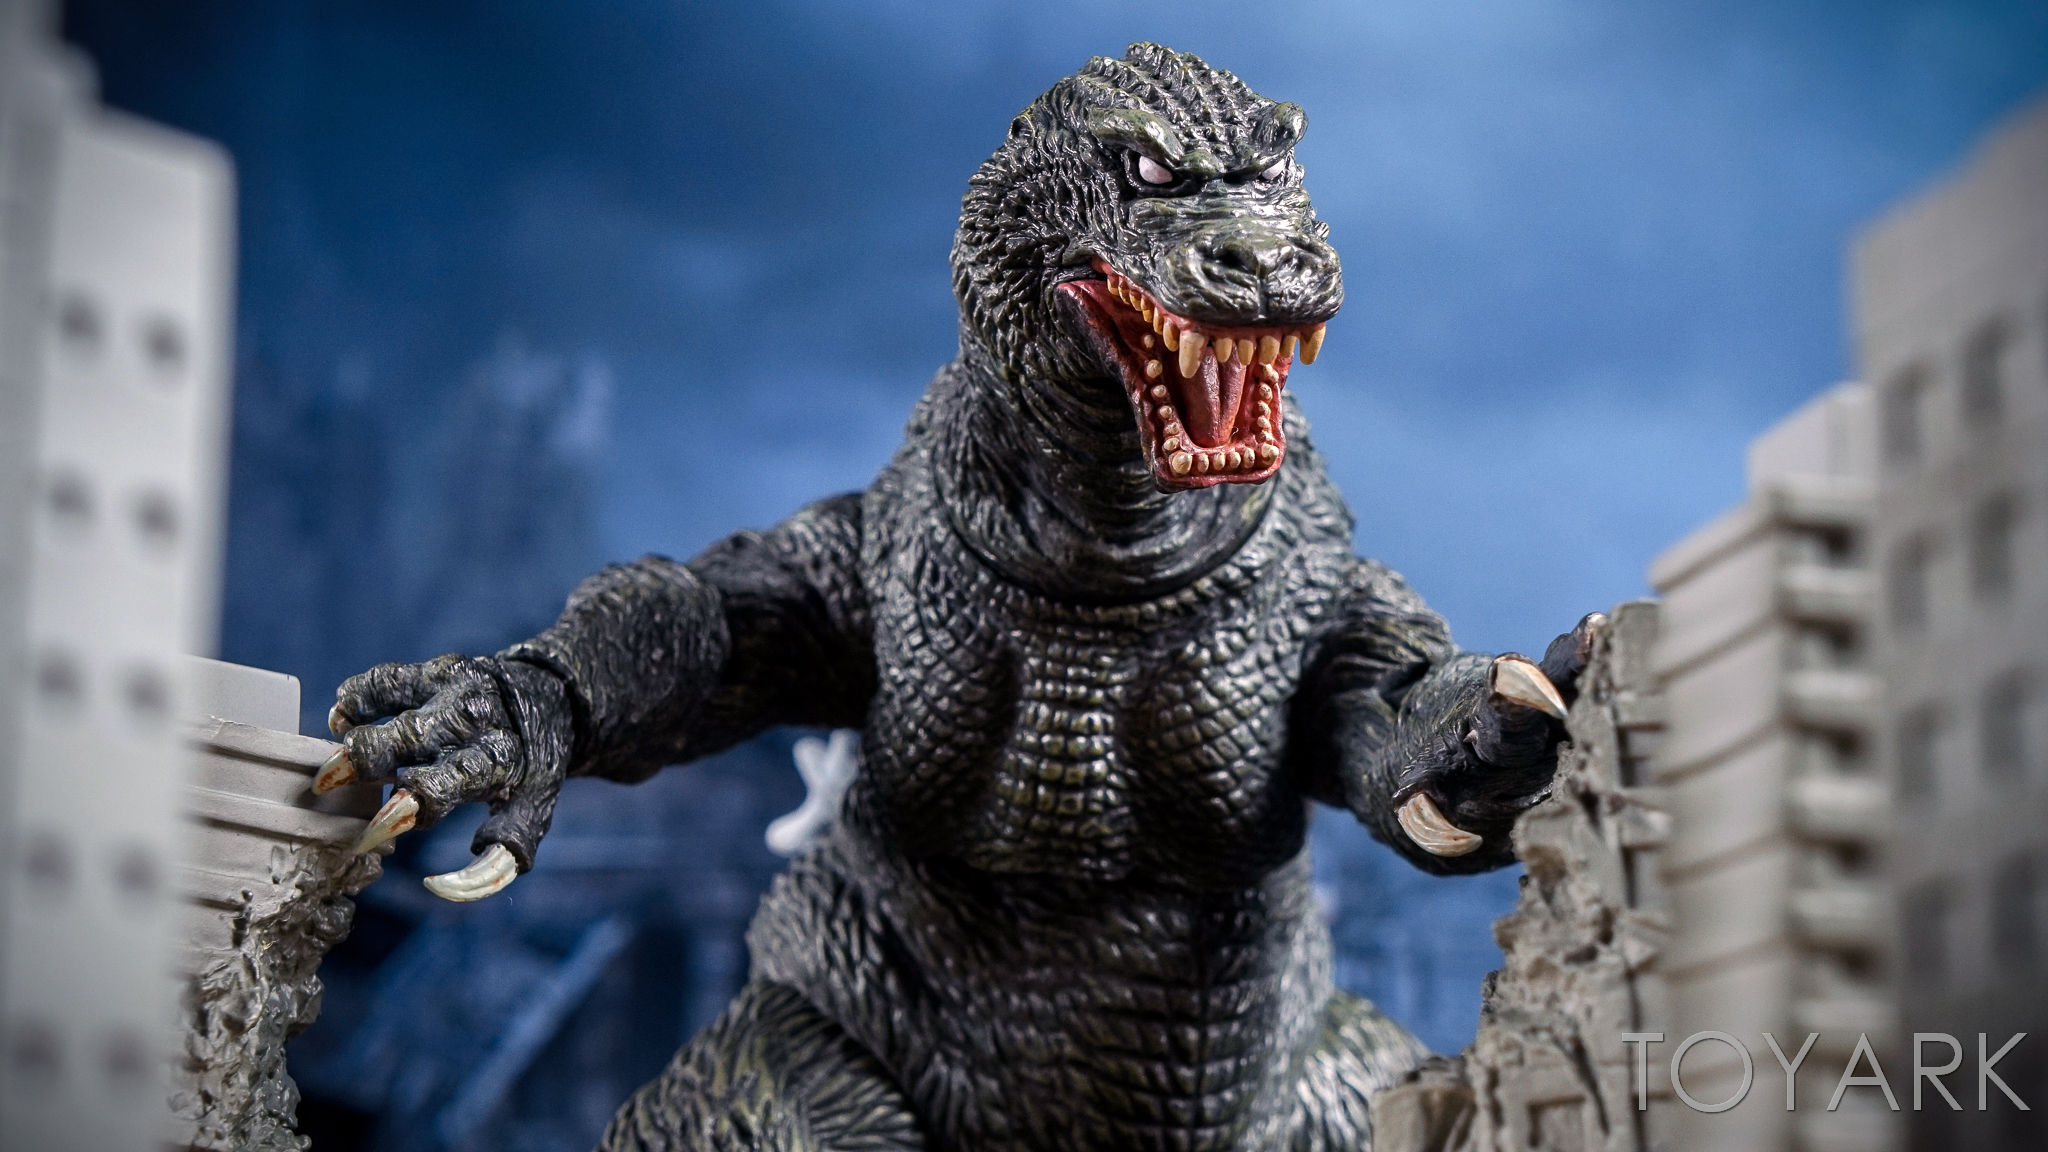 NECA's Godzilla, Mothra And King Ghidorah: Giant Monsters All Out Attack 1st Look Gallery